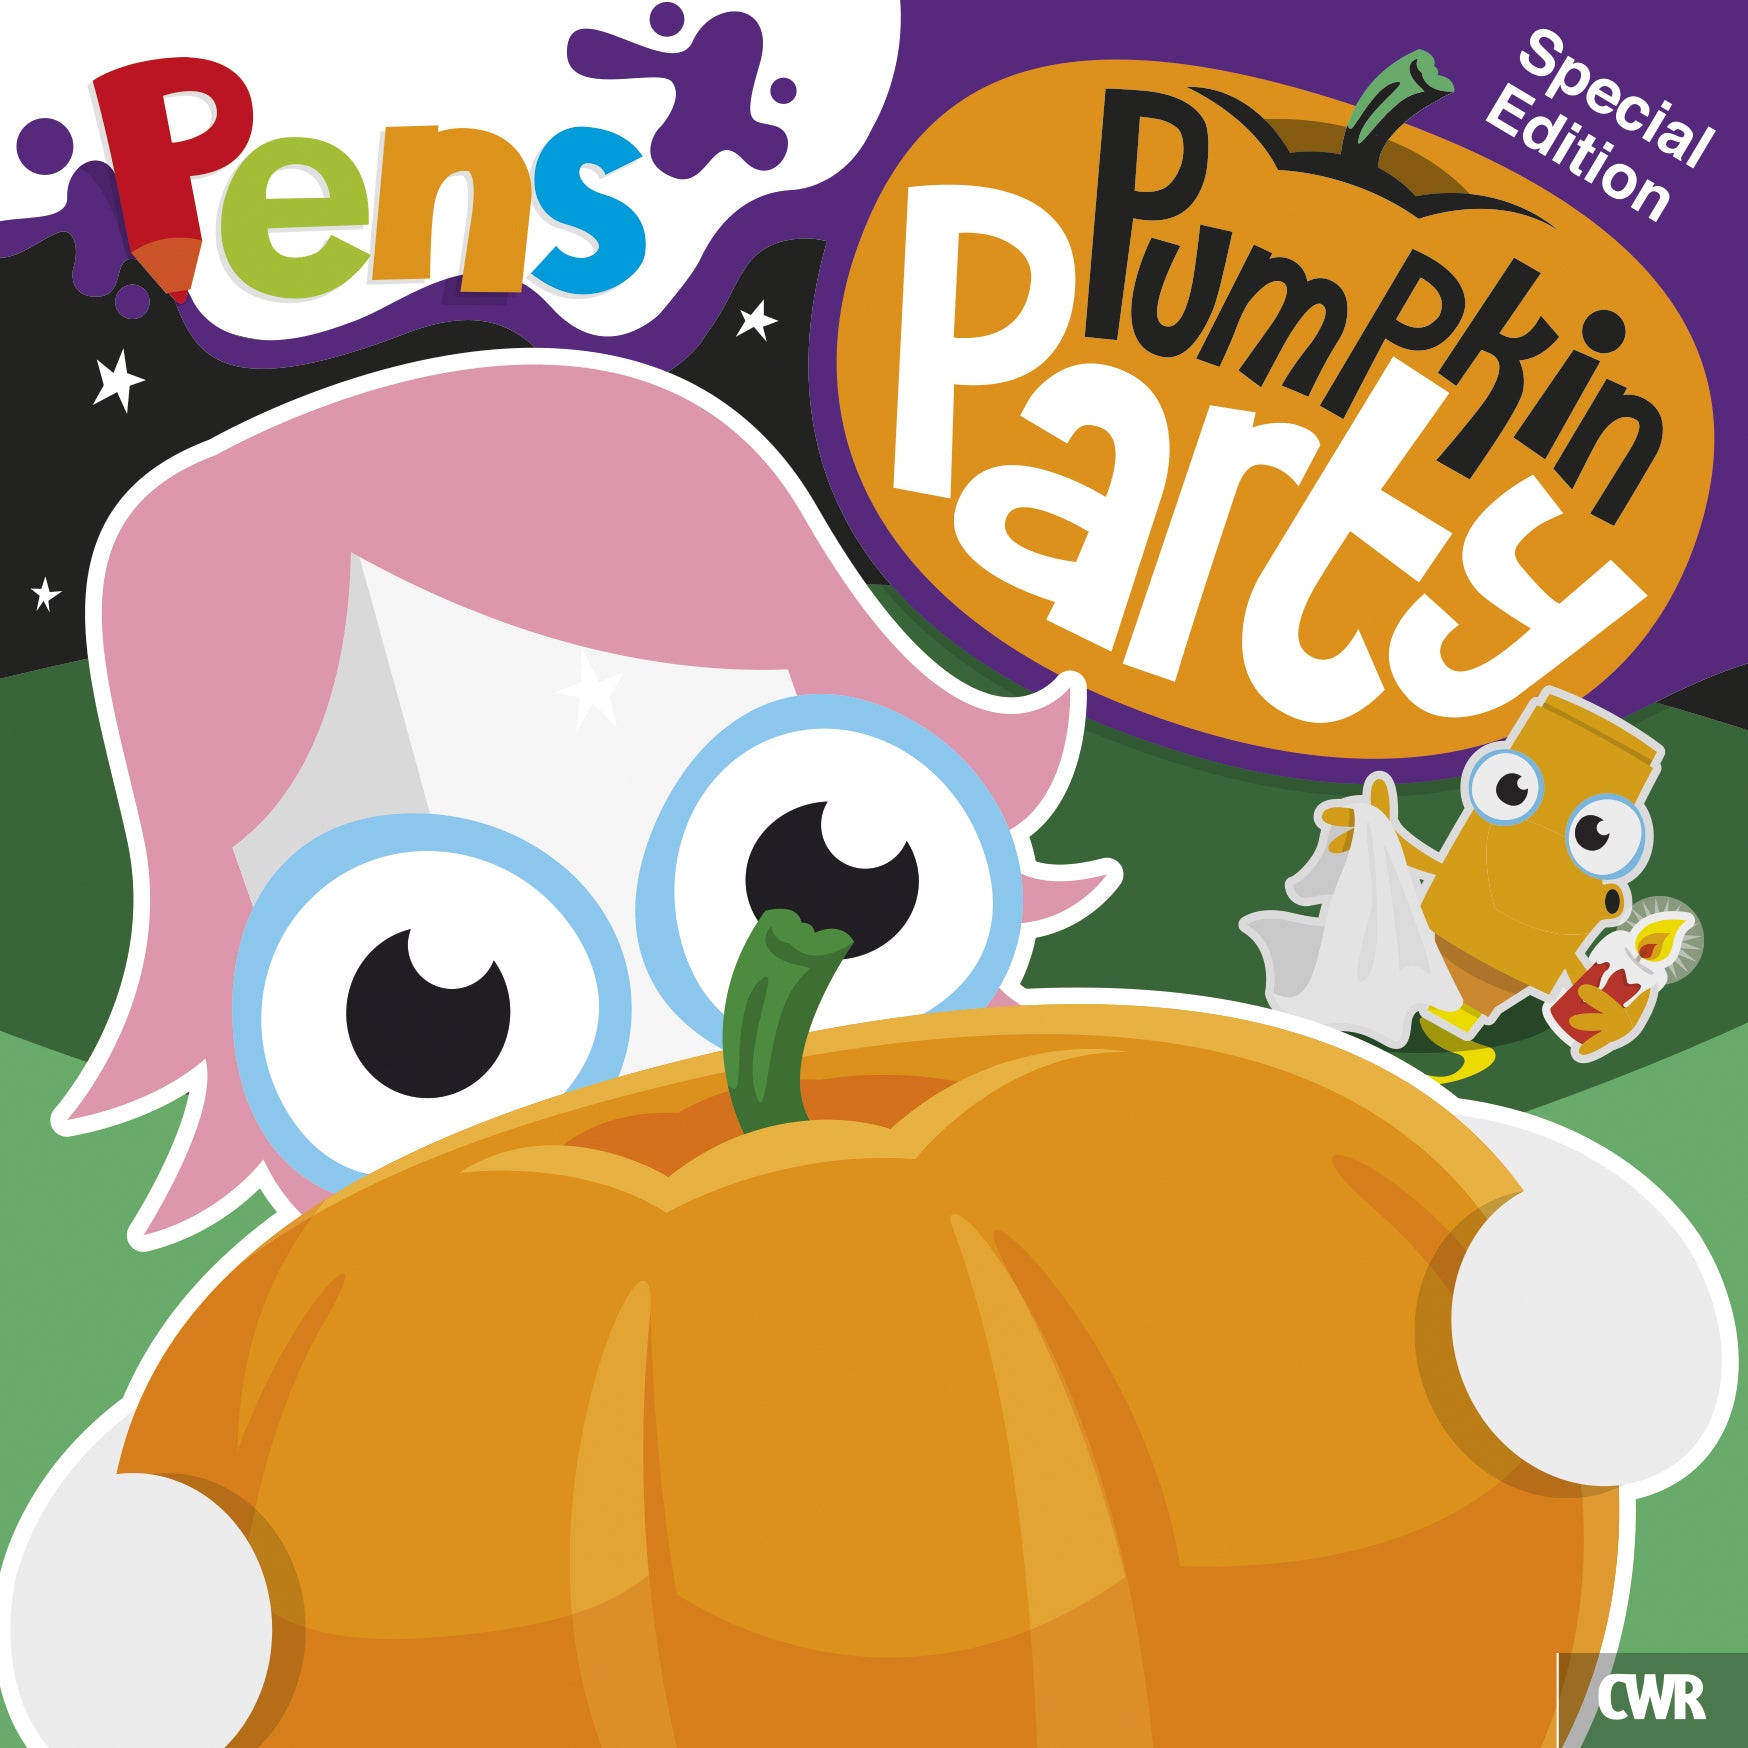 Image of Pens Special: Pumpkin Party other